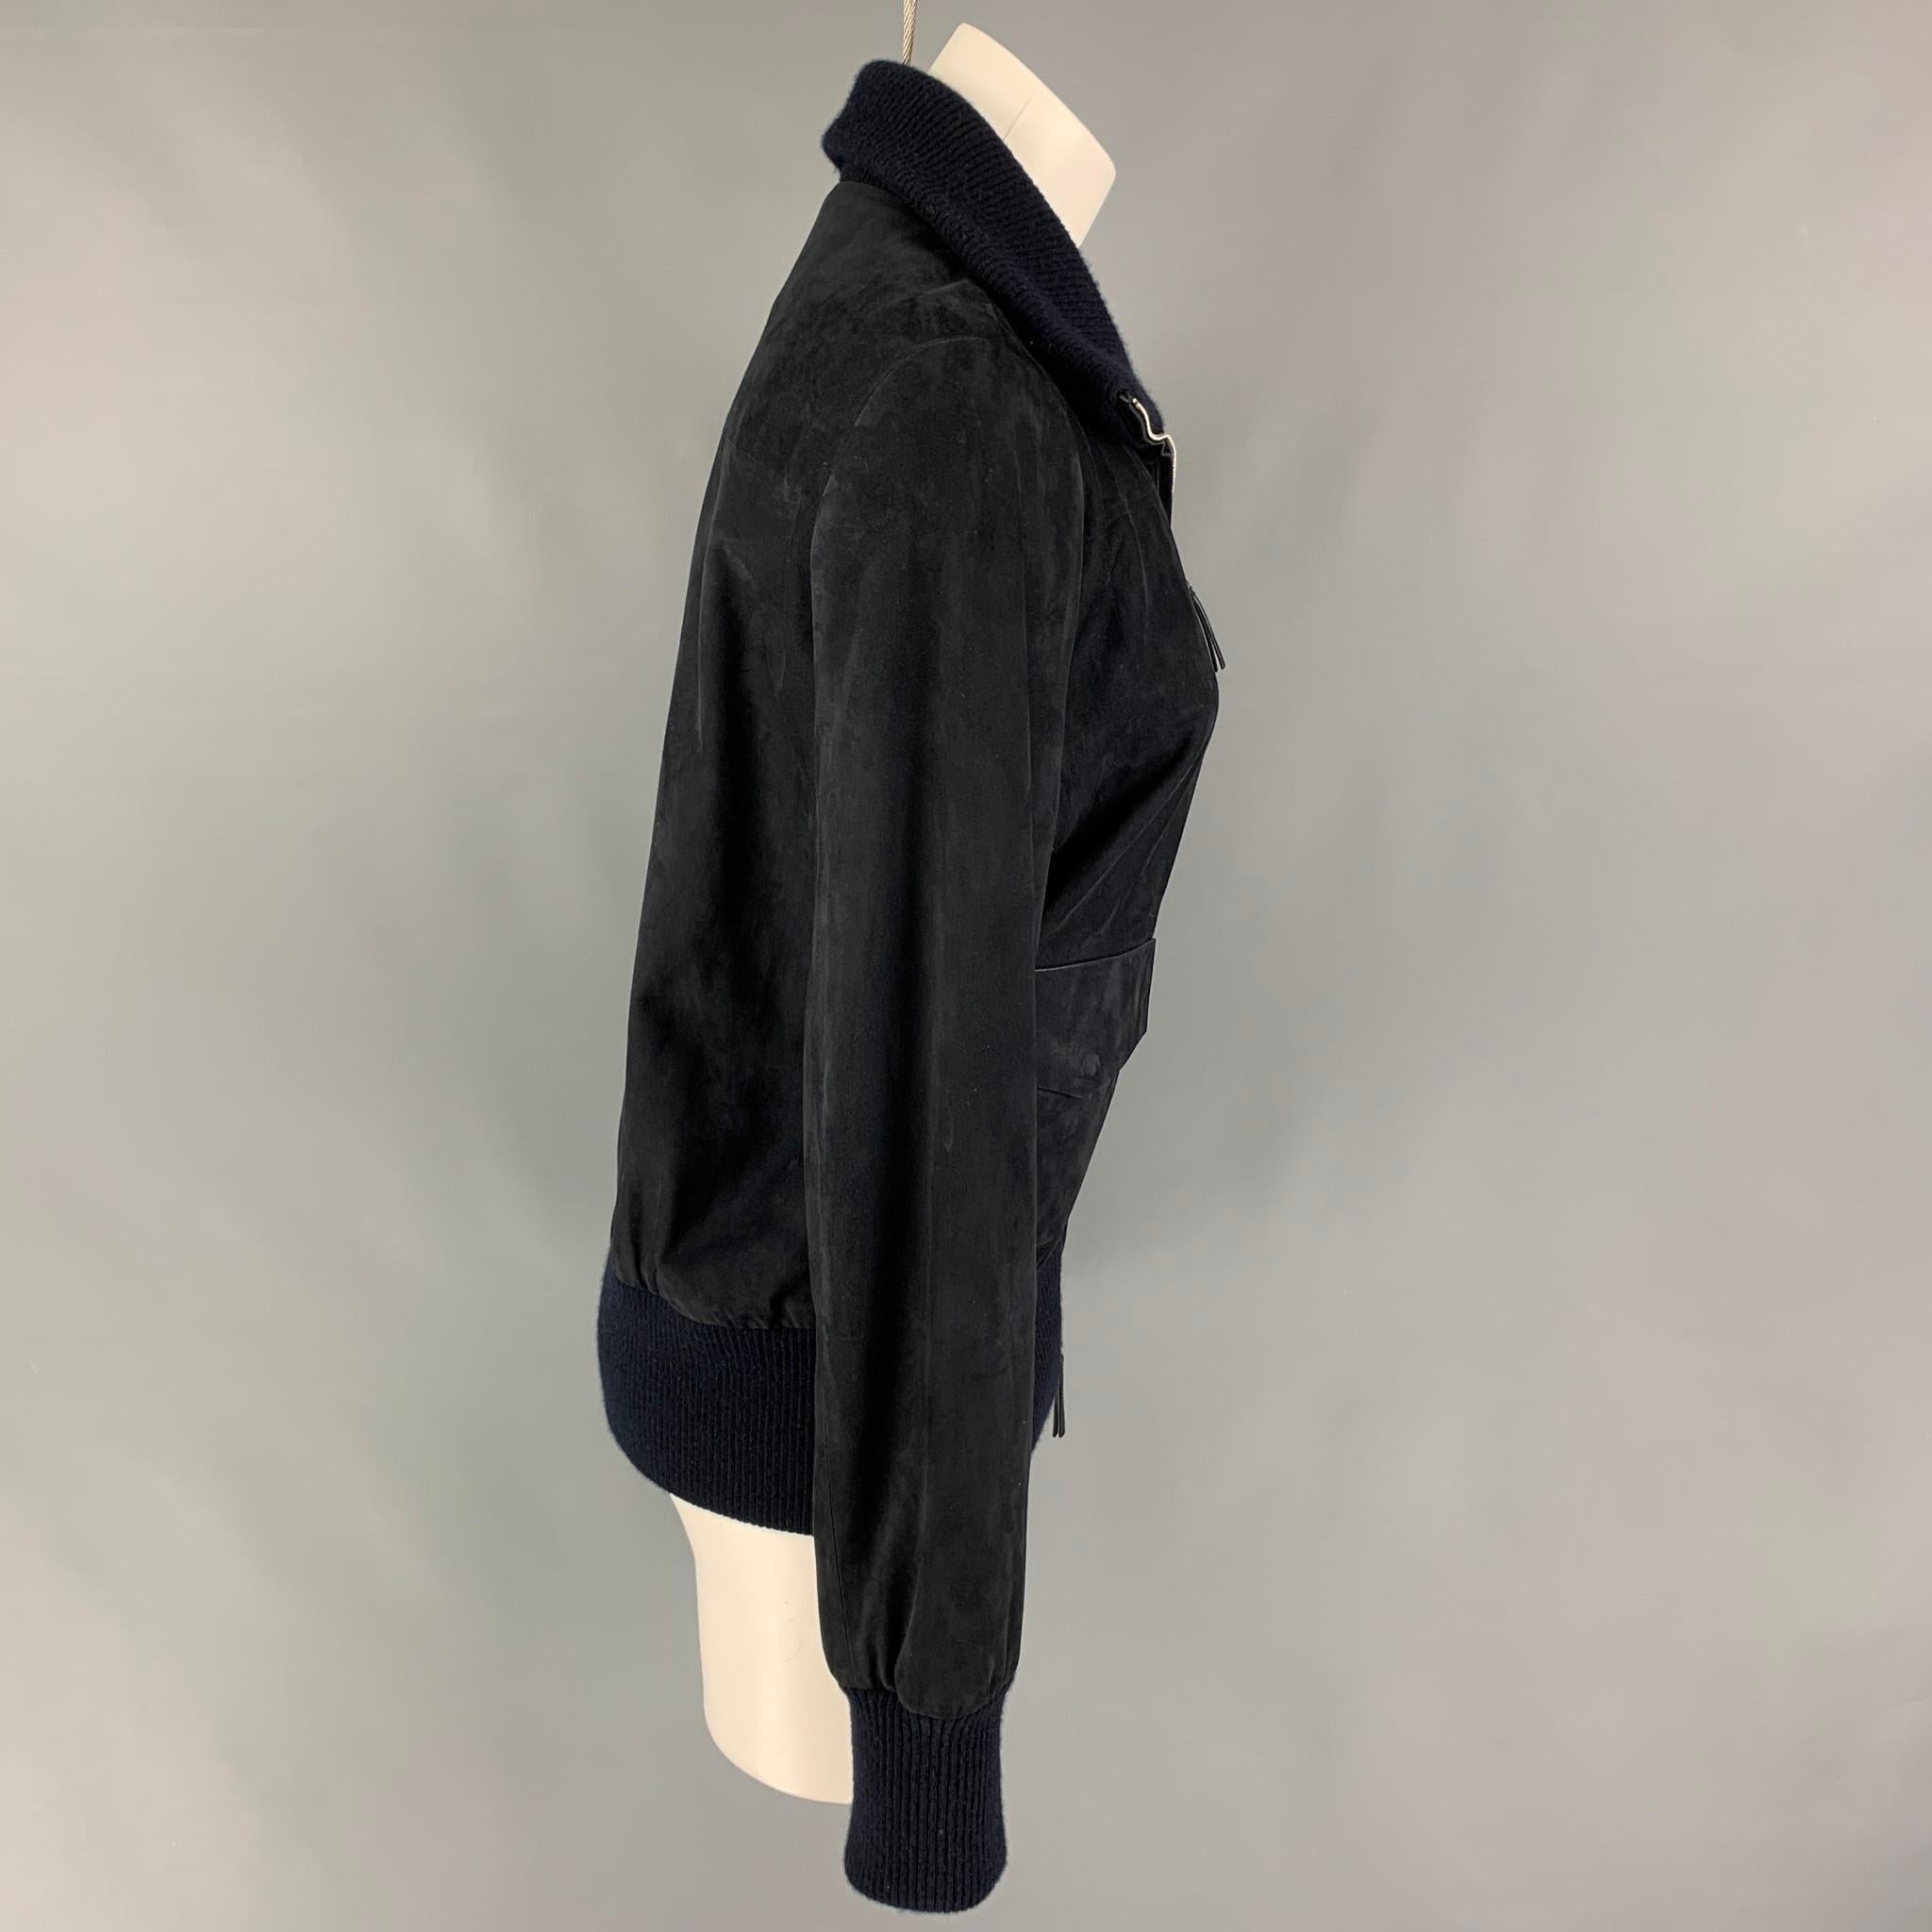 THE ROW jacket comes in a navy lamb skin suede featuring a wool blend ribbed hem, high neck, flap pockets, and a full zip up closure. Made in Italy. 

Very Good Pre-Owned Condition.
Marked: S

Measurements:

Shoulder: 16 in.
Bust: 38 in.
Sleeve: